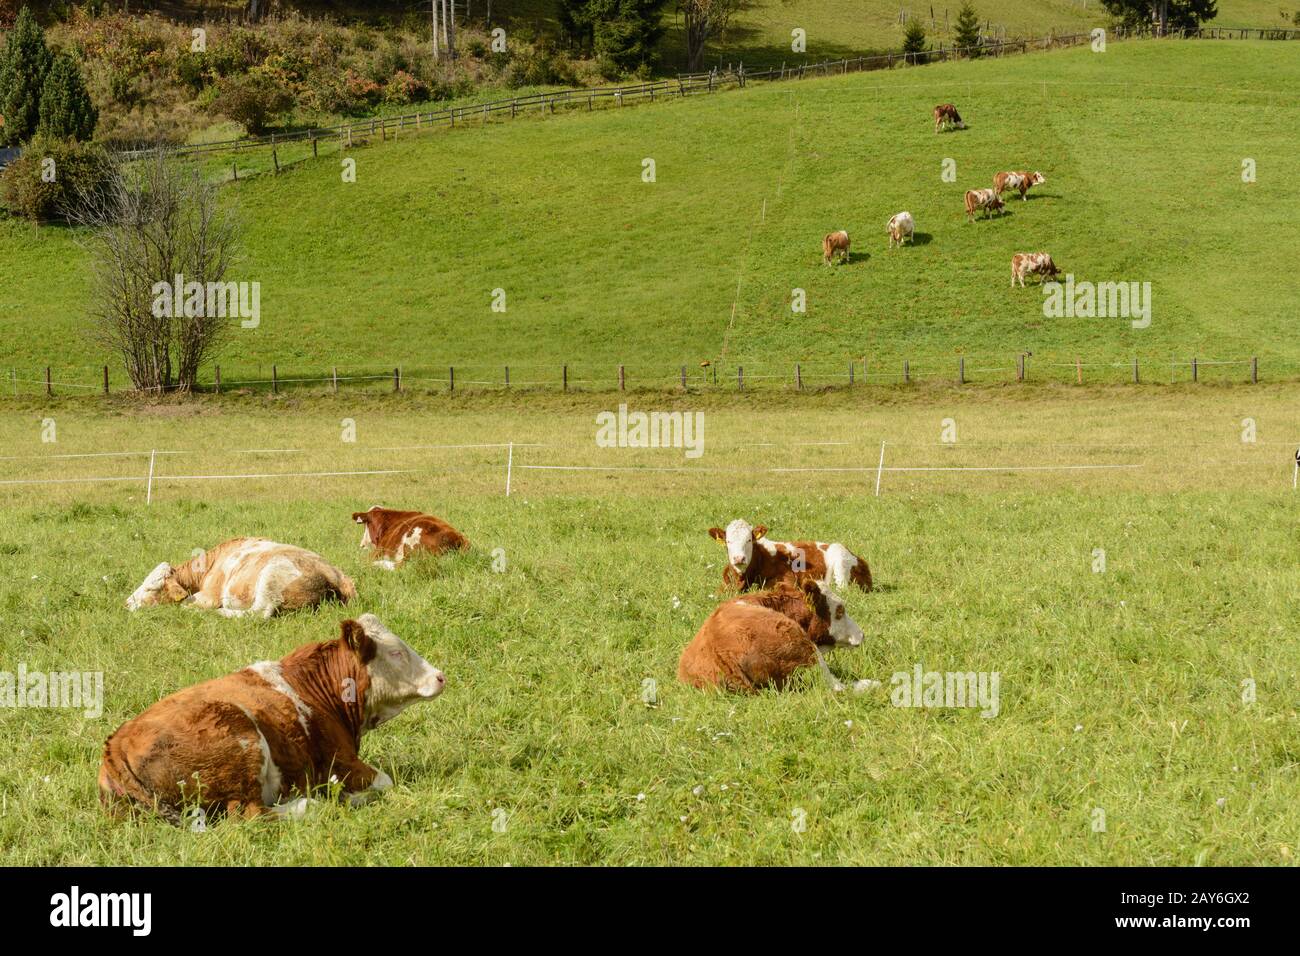 some cows graze on a lush green meadow in a hilly landscape Stock Photo